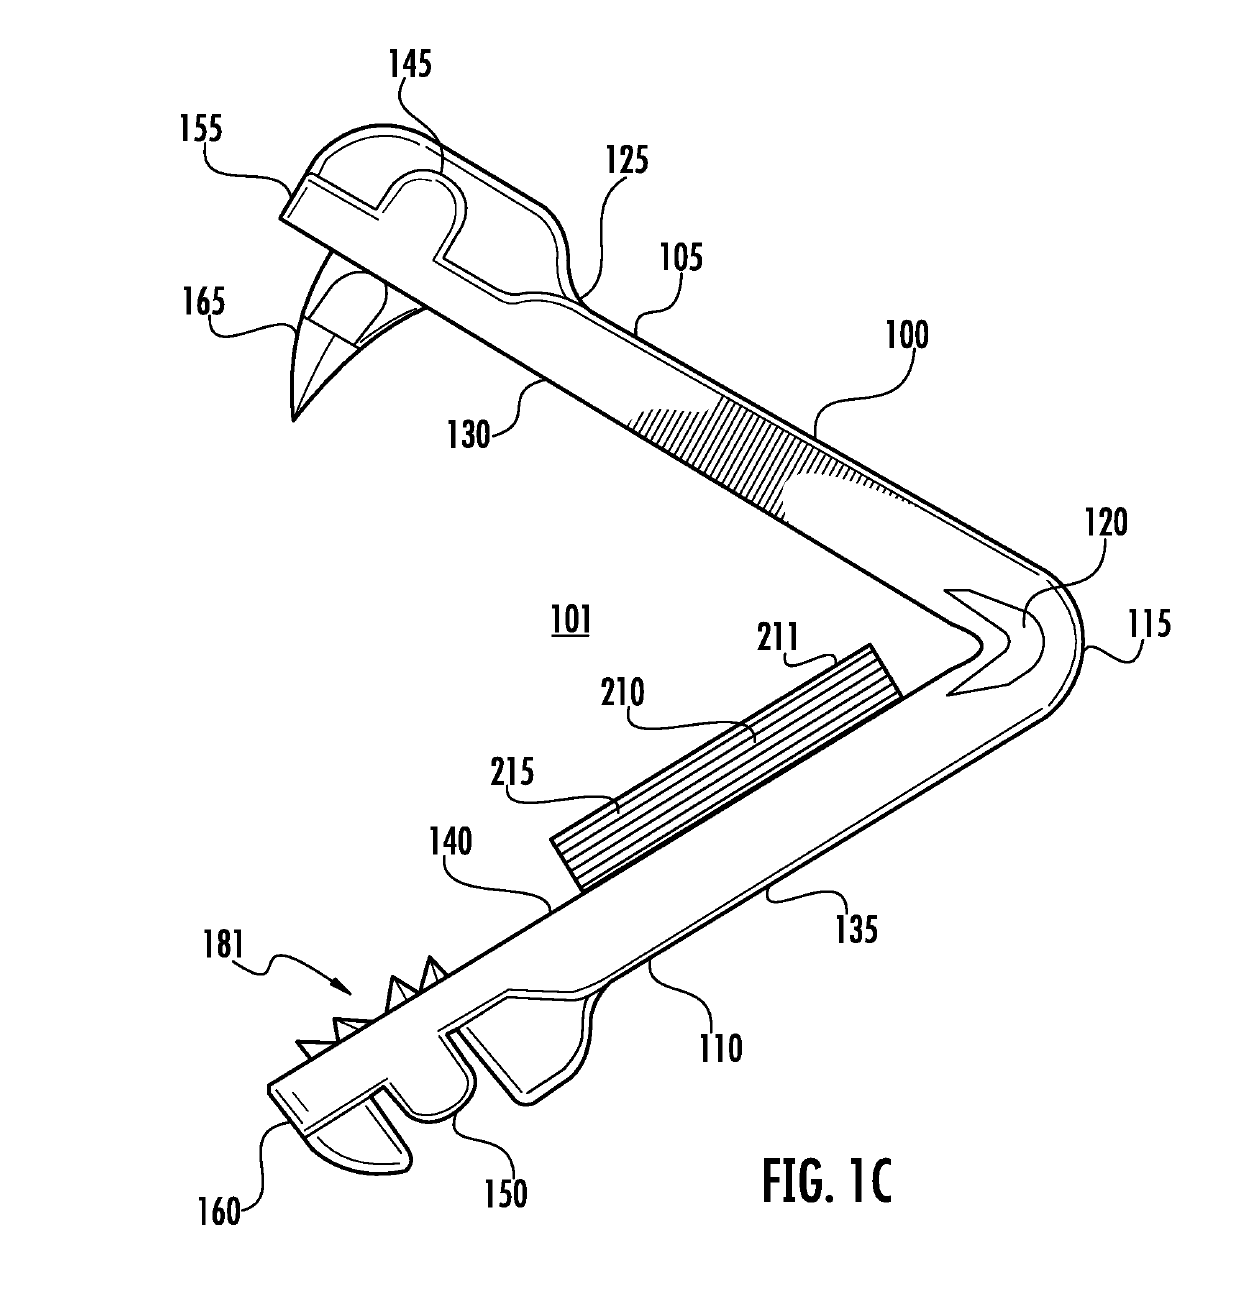 SURGICAL CLIPS WITH PENETRATING LOCKing mechanism and NON-SLIP CLAMPING SURFACES